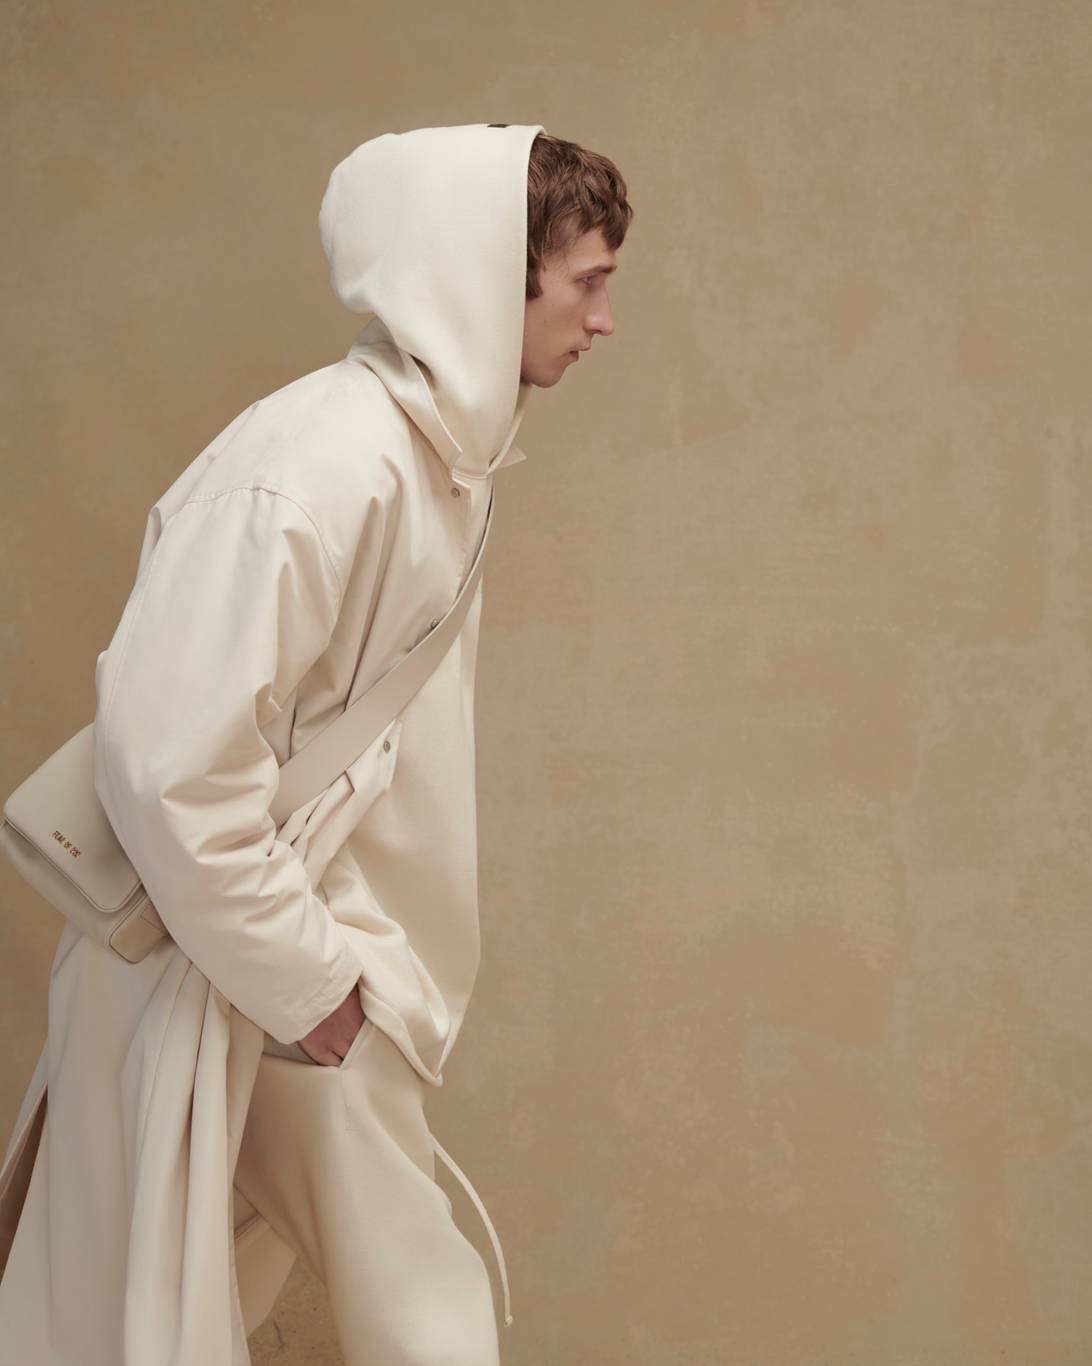 MMSCENE GUIDE: How to Style Fear of God Essentials